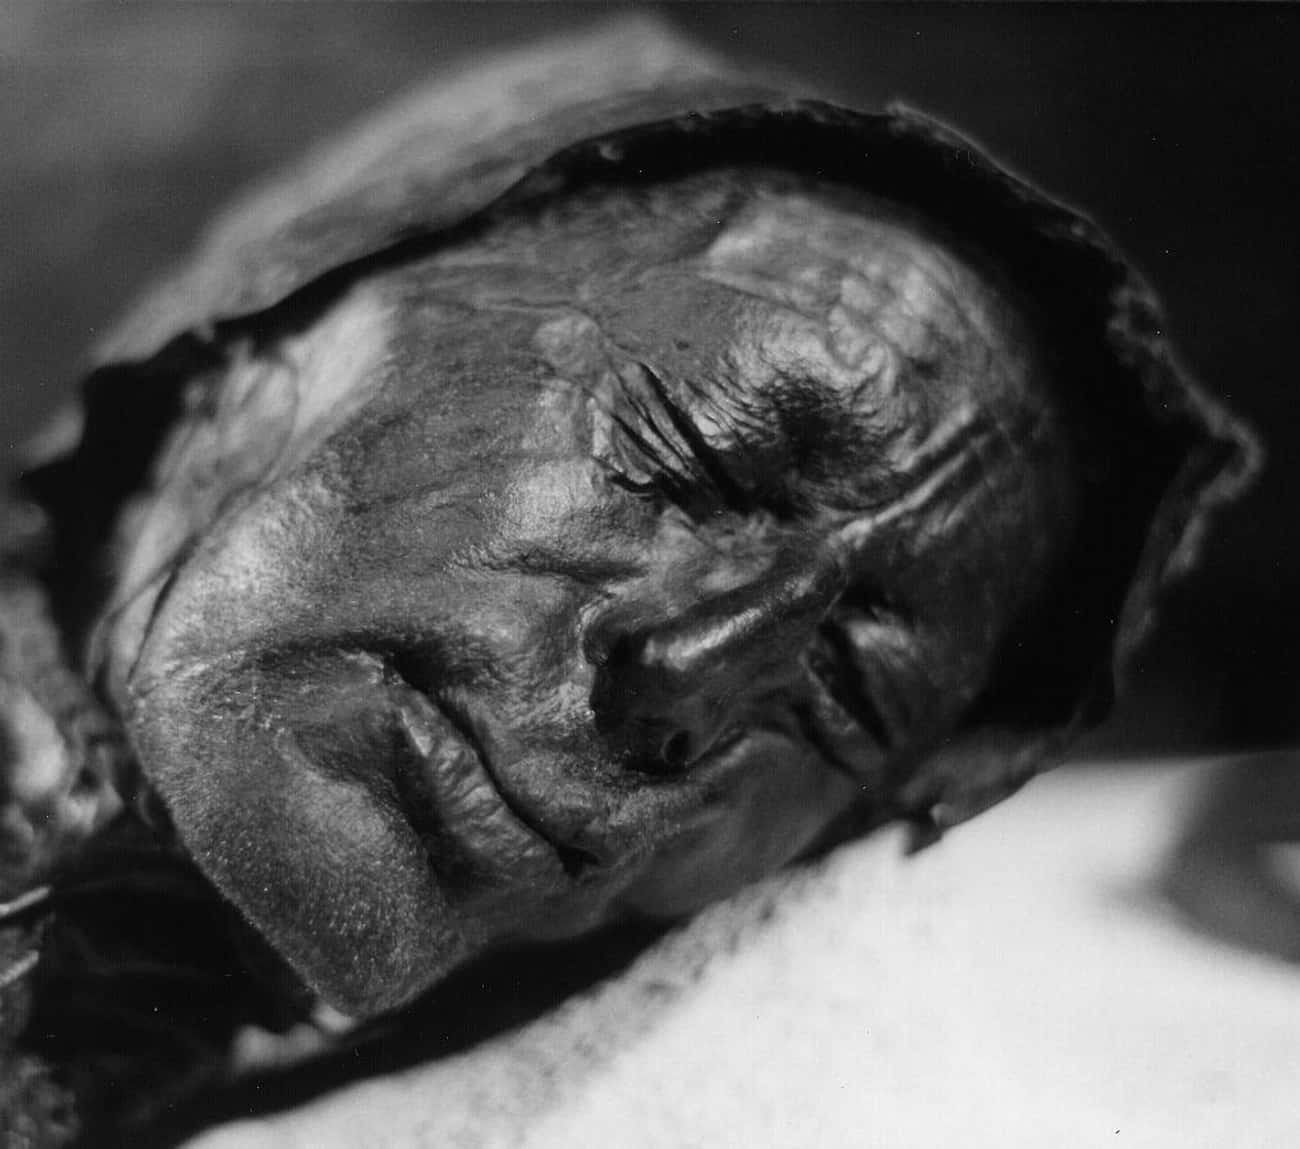 The Mummified Remains Of The Tollund Man Who Lived 2,300 Years Ago